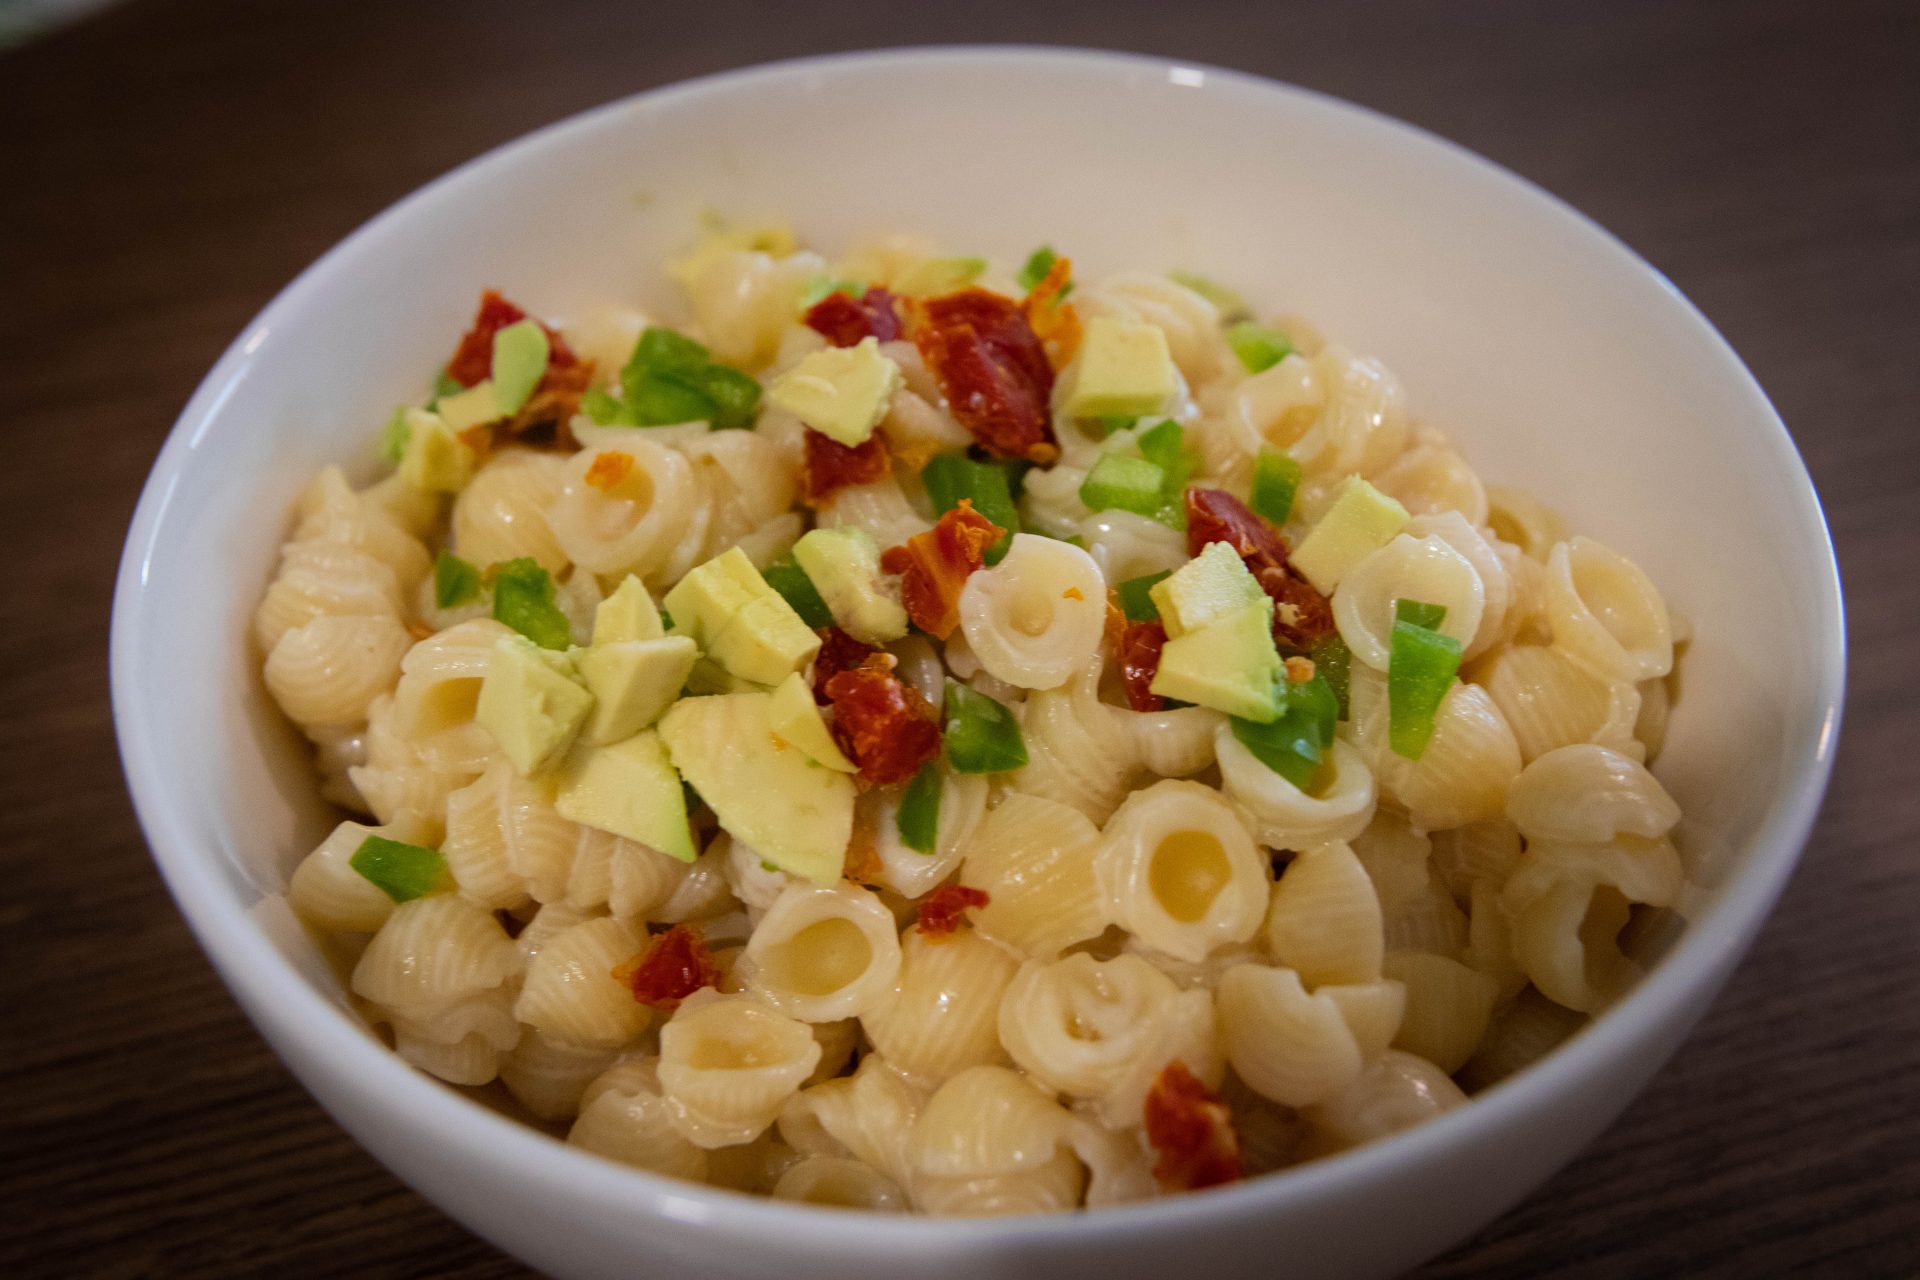 Up-close photo showing the mac and cheese with toppings.